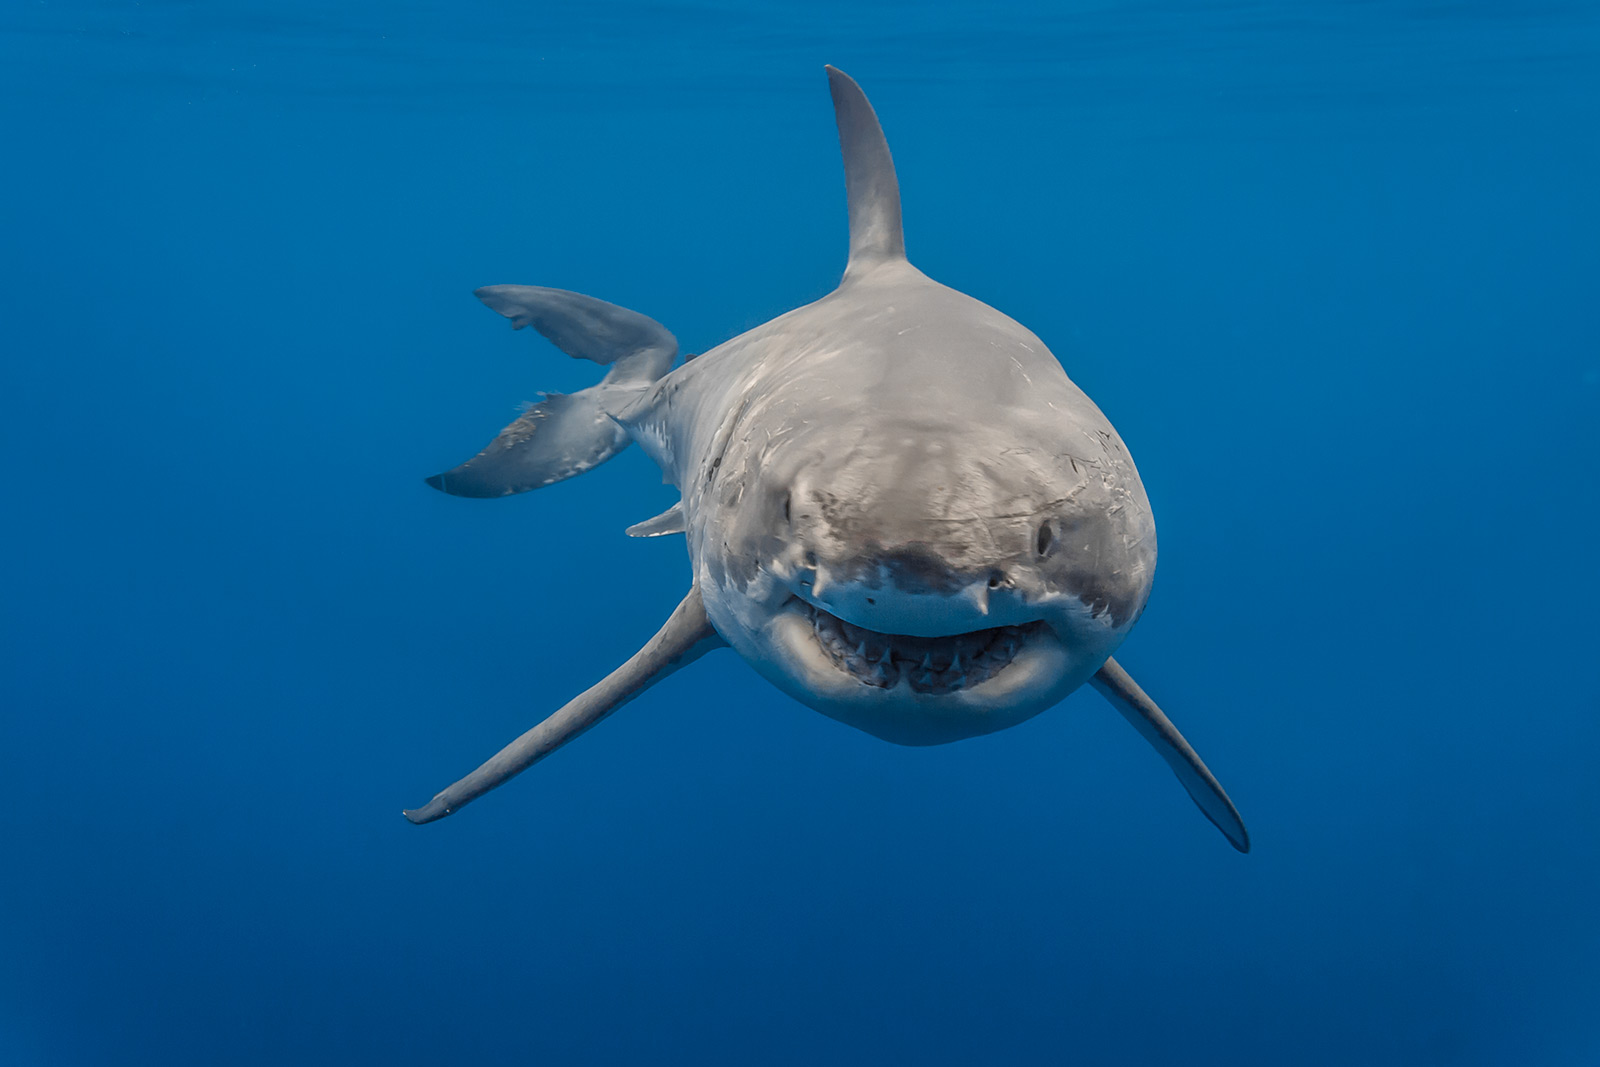 A close-up of a female great white shark named Lucy image